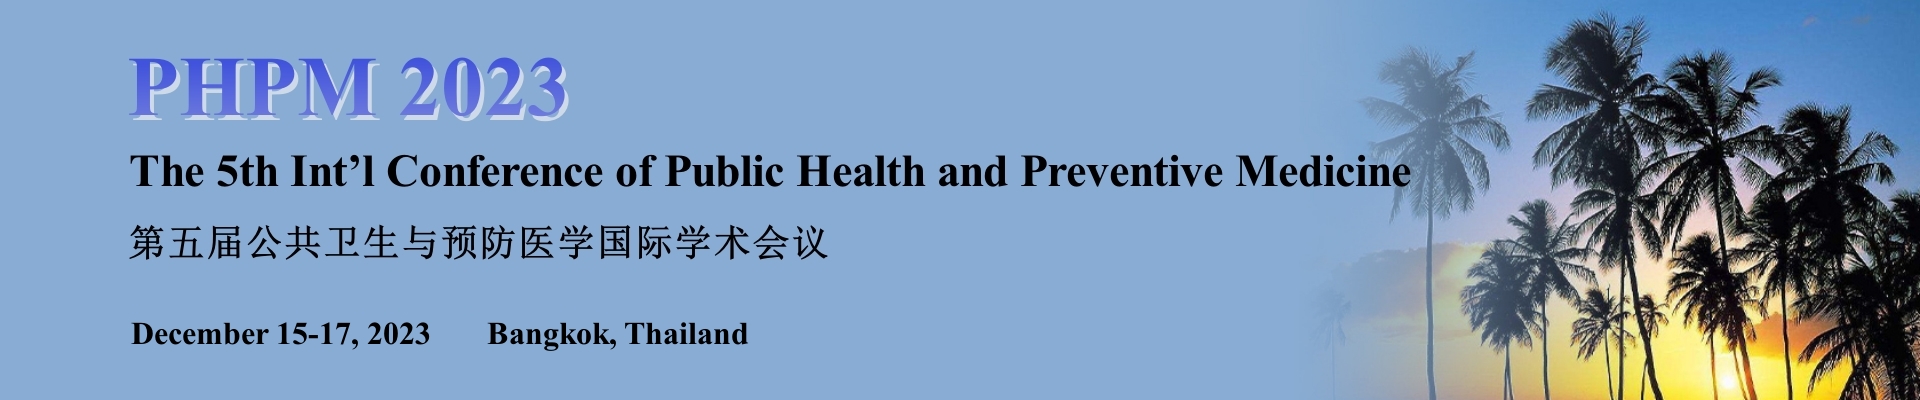 The 5th Int’l Conference of Public Health and Preventive Medicine (PHPM 2023), Online Event